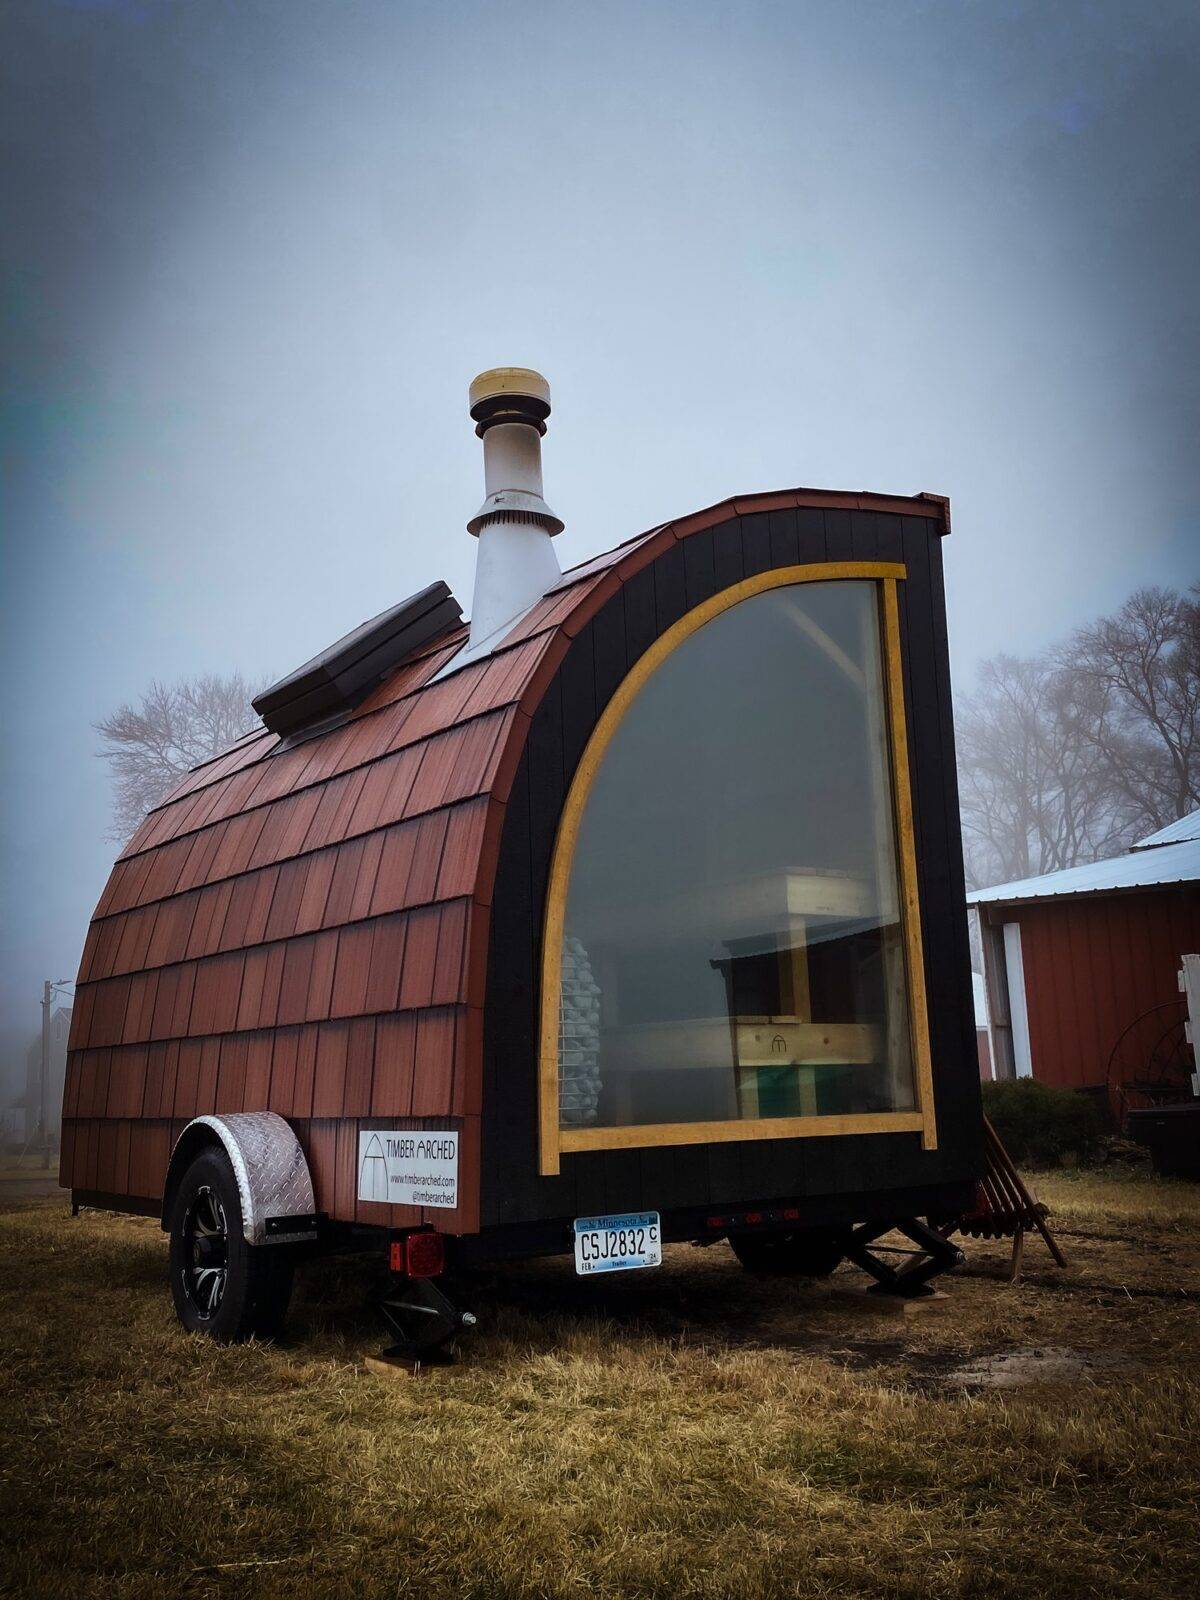 Timber Arched Mobile Sauna